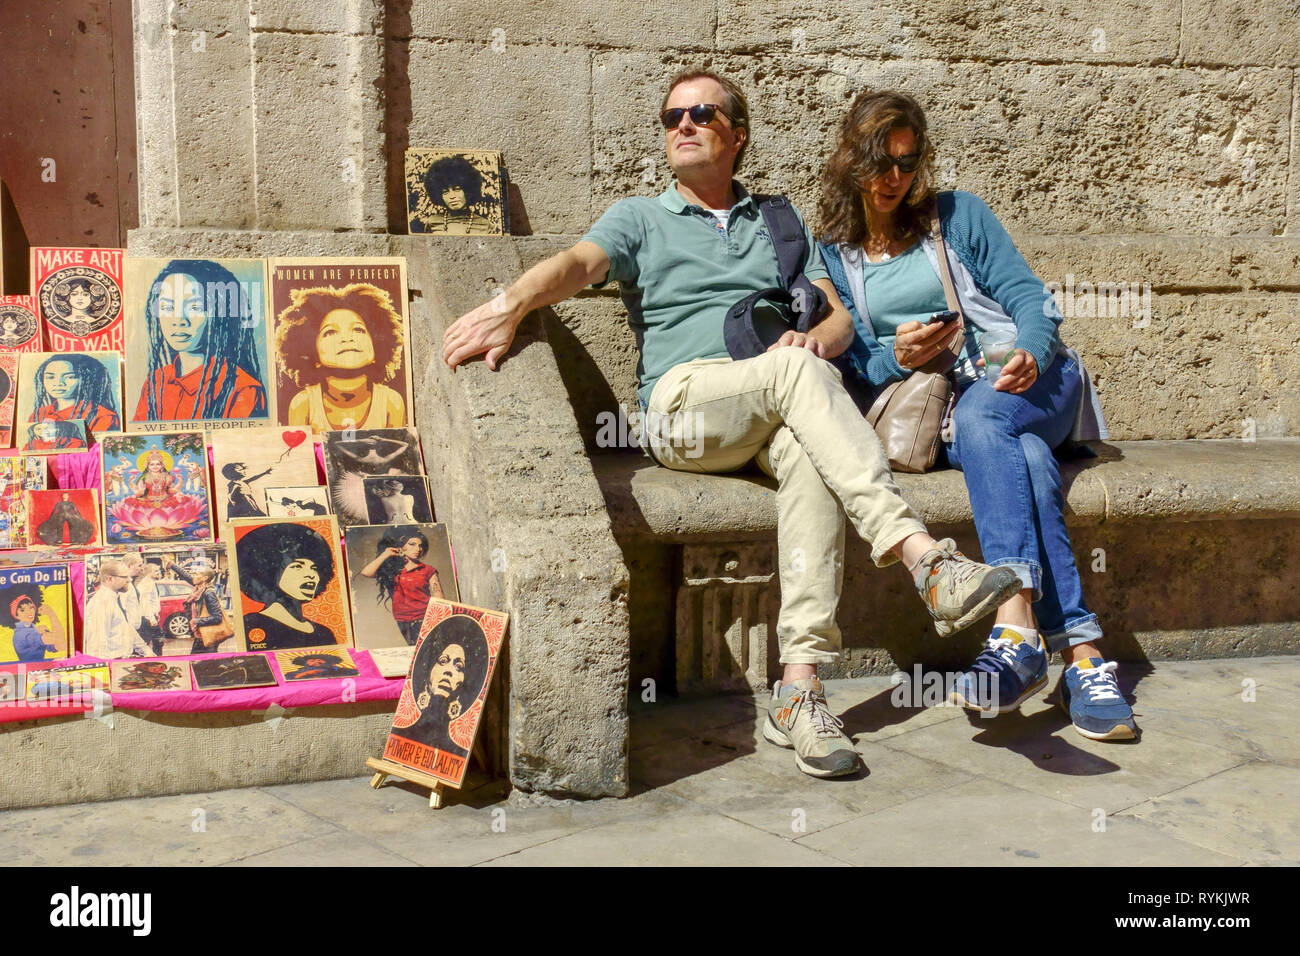 Spain Valencia tourists people sitting front of Cathedral Valencia Old Town Spain Carrer de Micalet street tourists sightseeing, pictures local artist Stock Photo